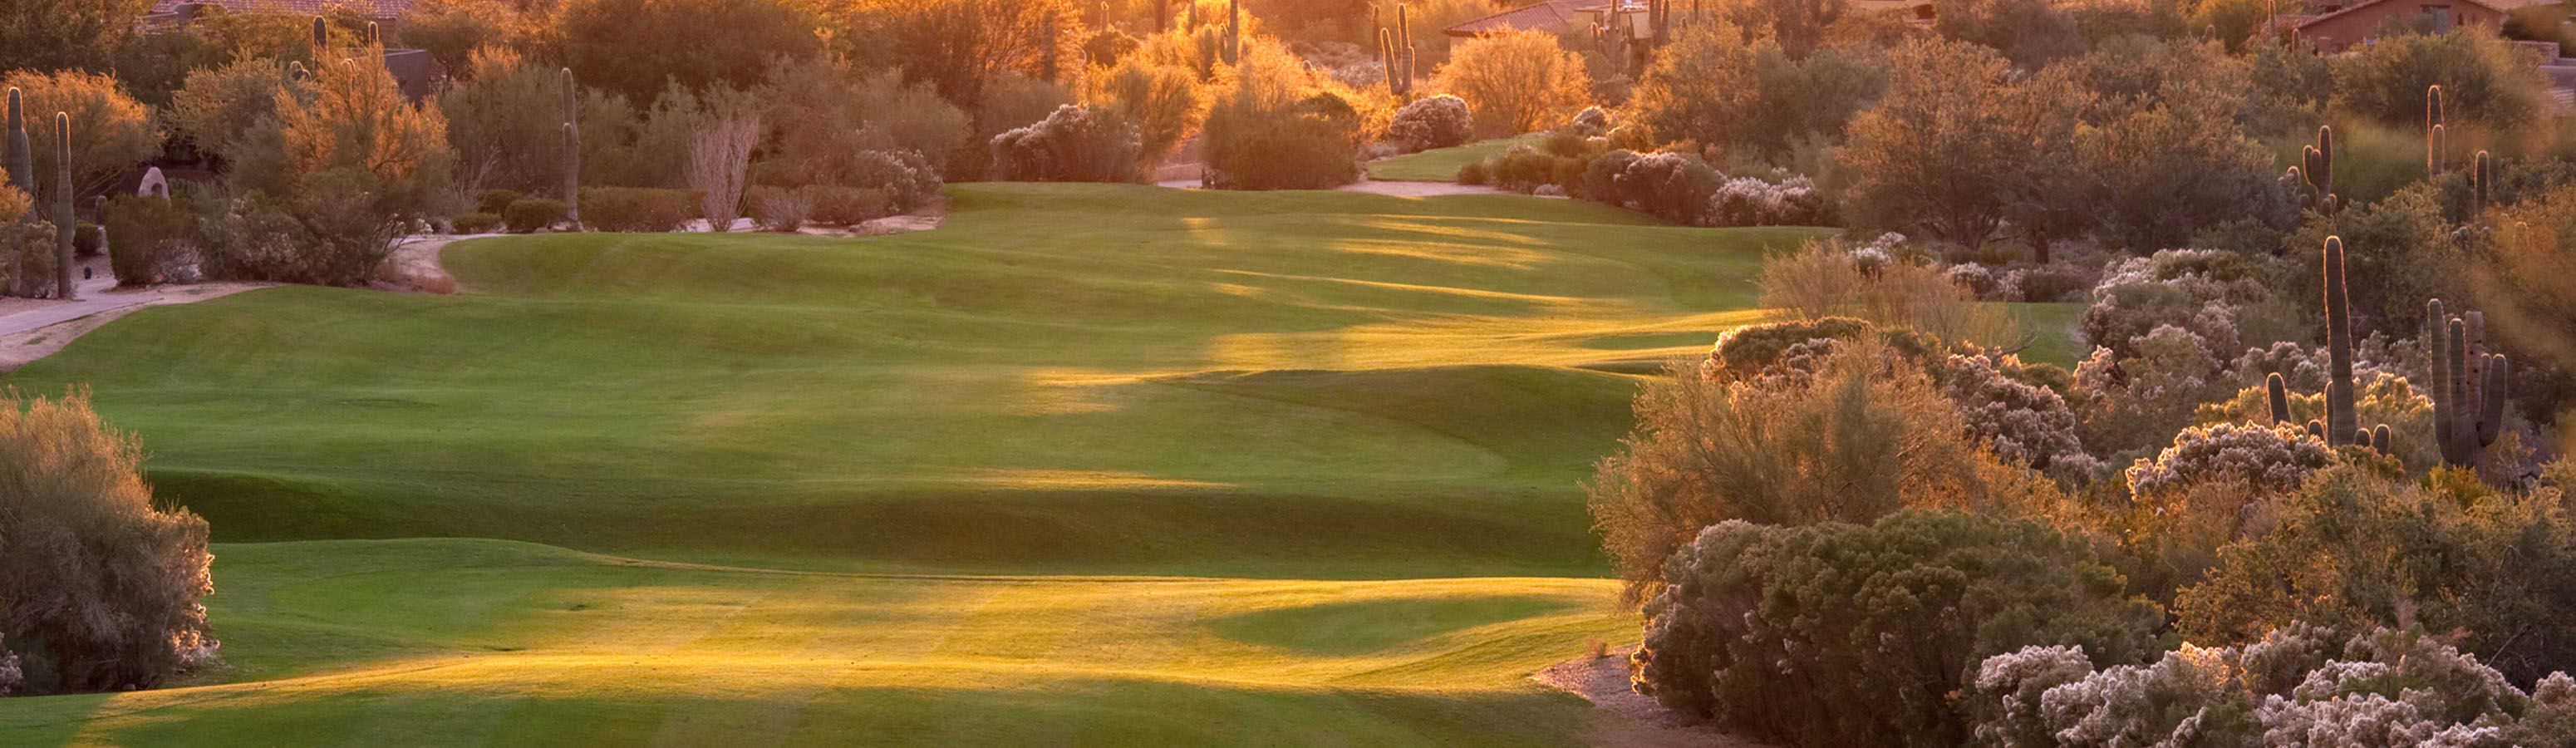 The most promising golf locations in the world